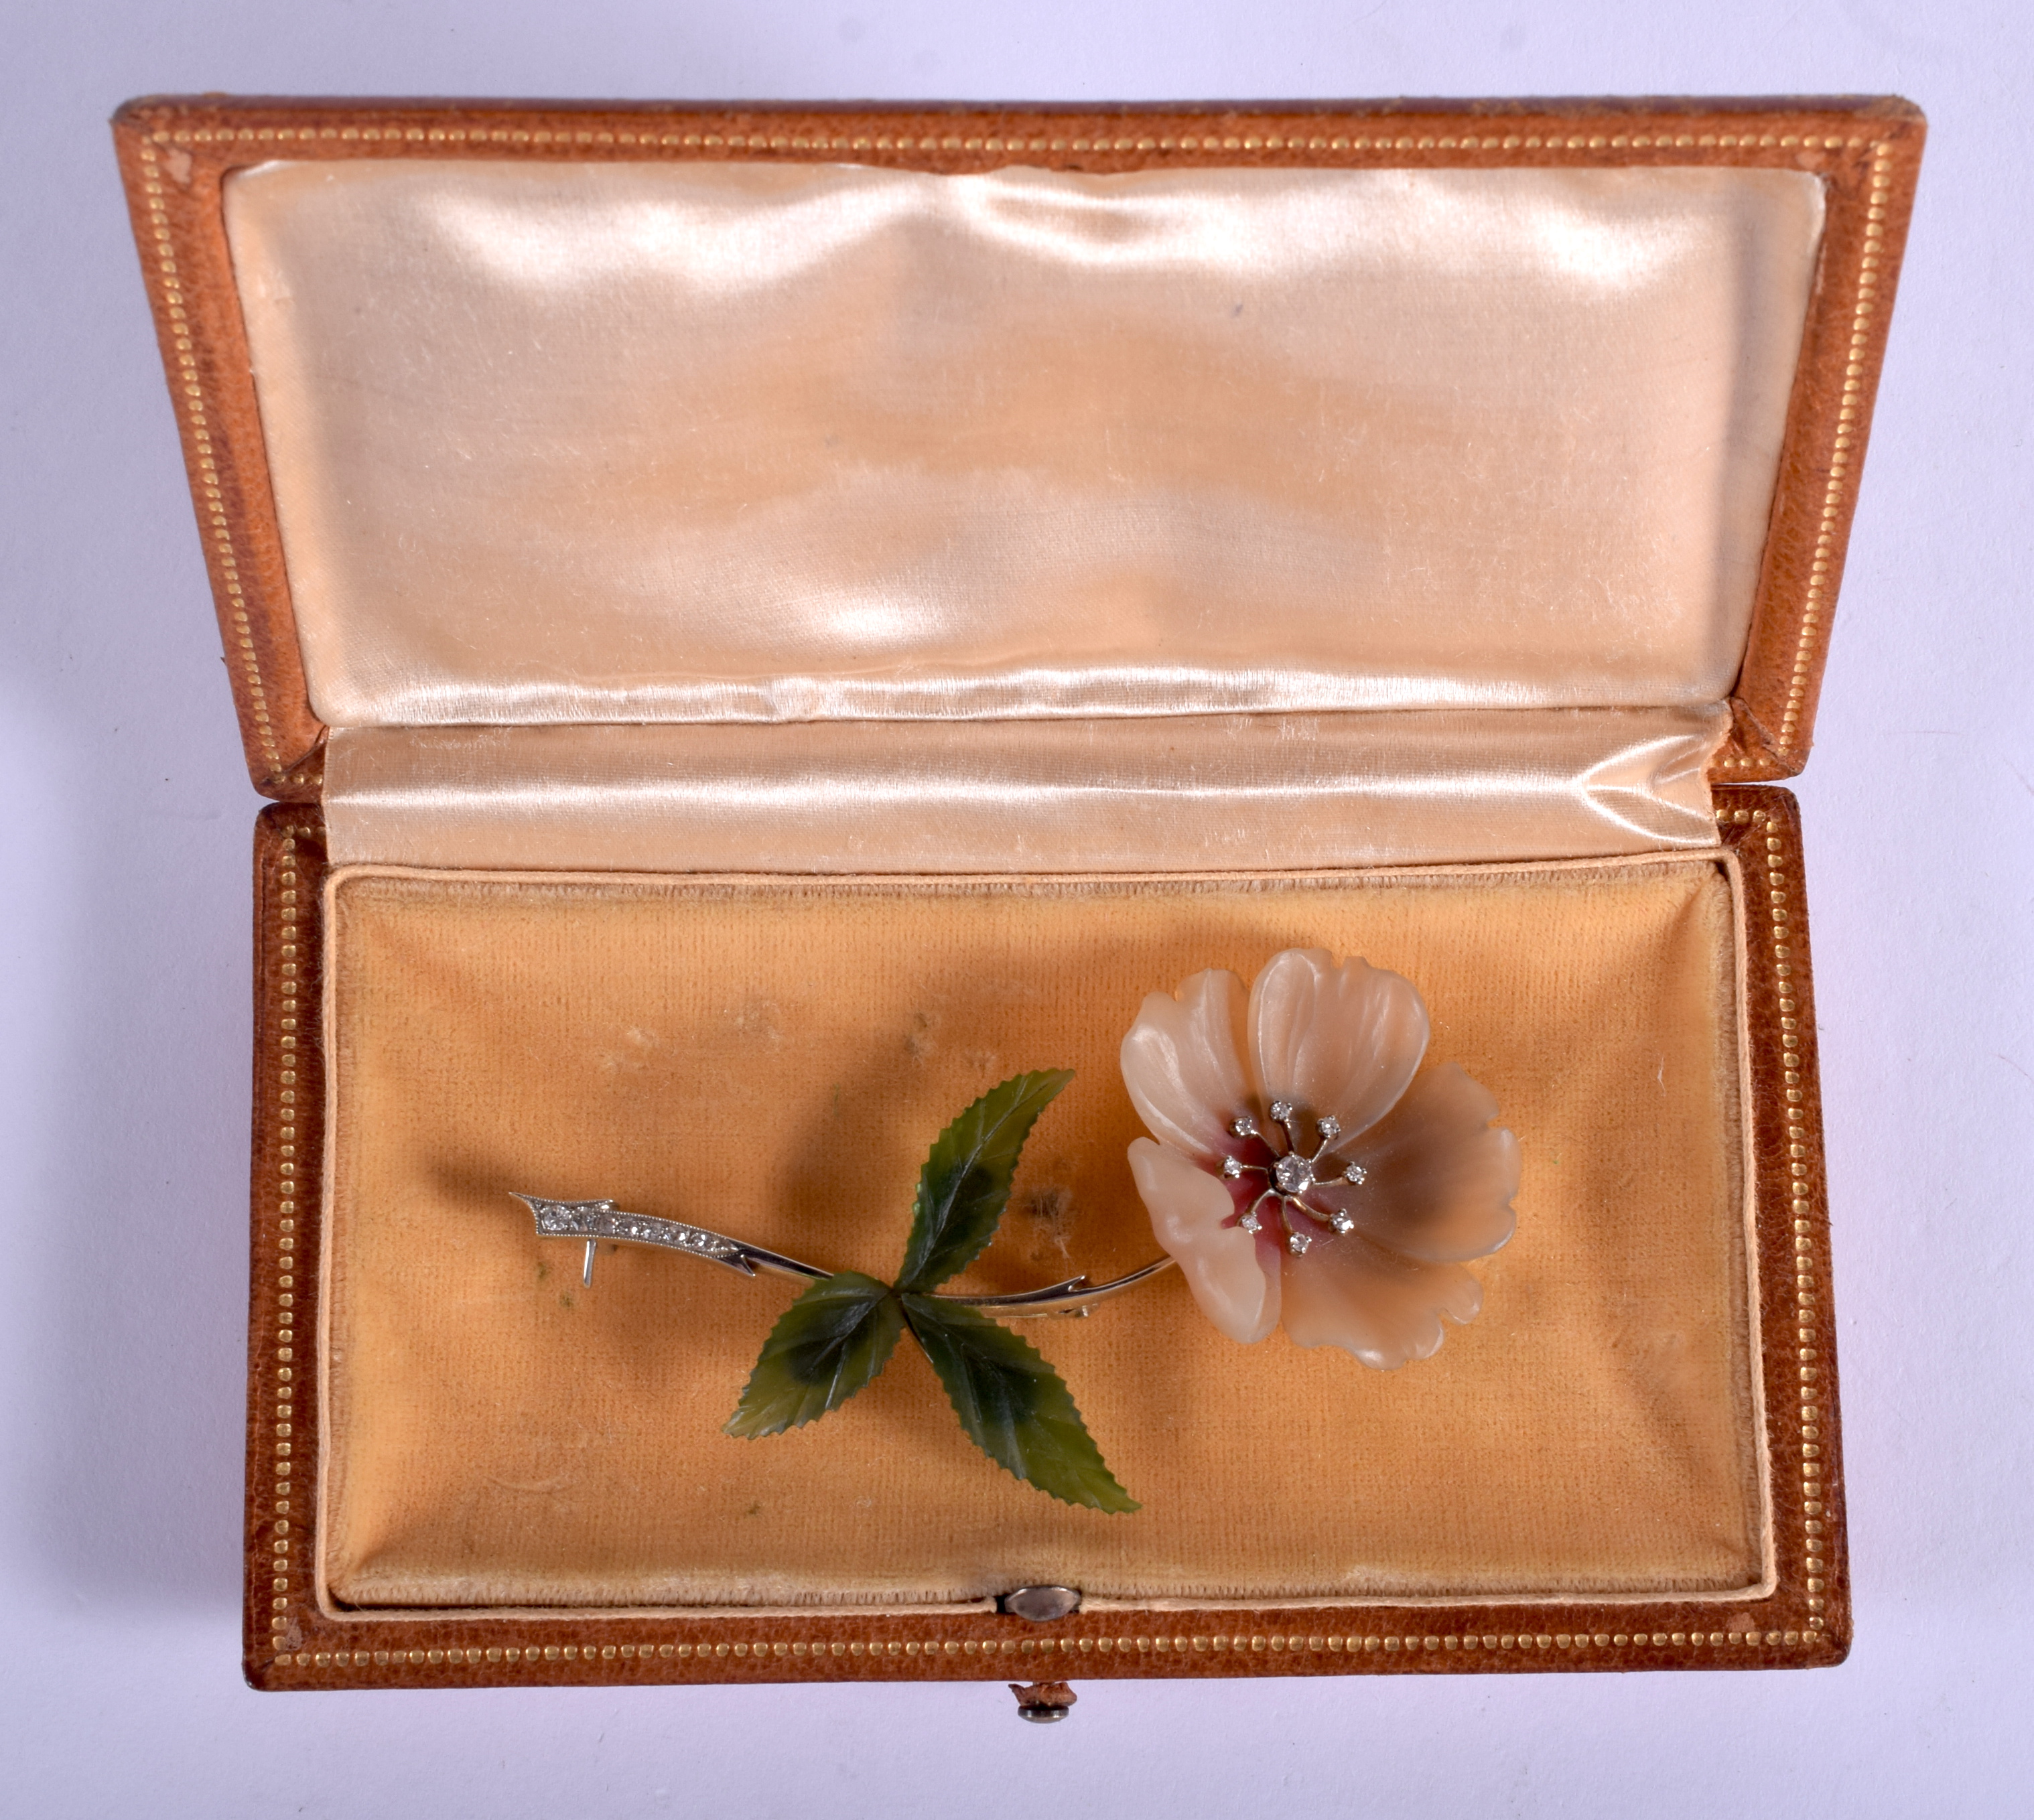 A FINE 18CT GOLD DIAMOND AND HARDSTONE BROOCH. 11.9 grams. 8.5 cm x 3.5 cm. - Image 4 of 4